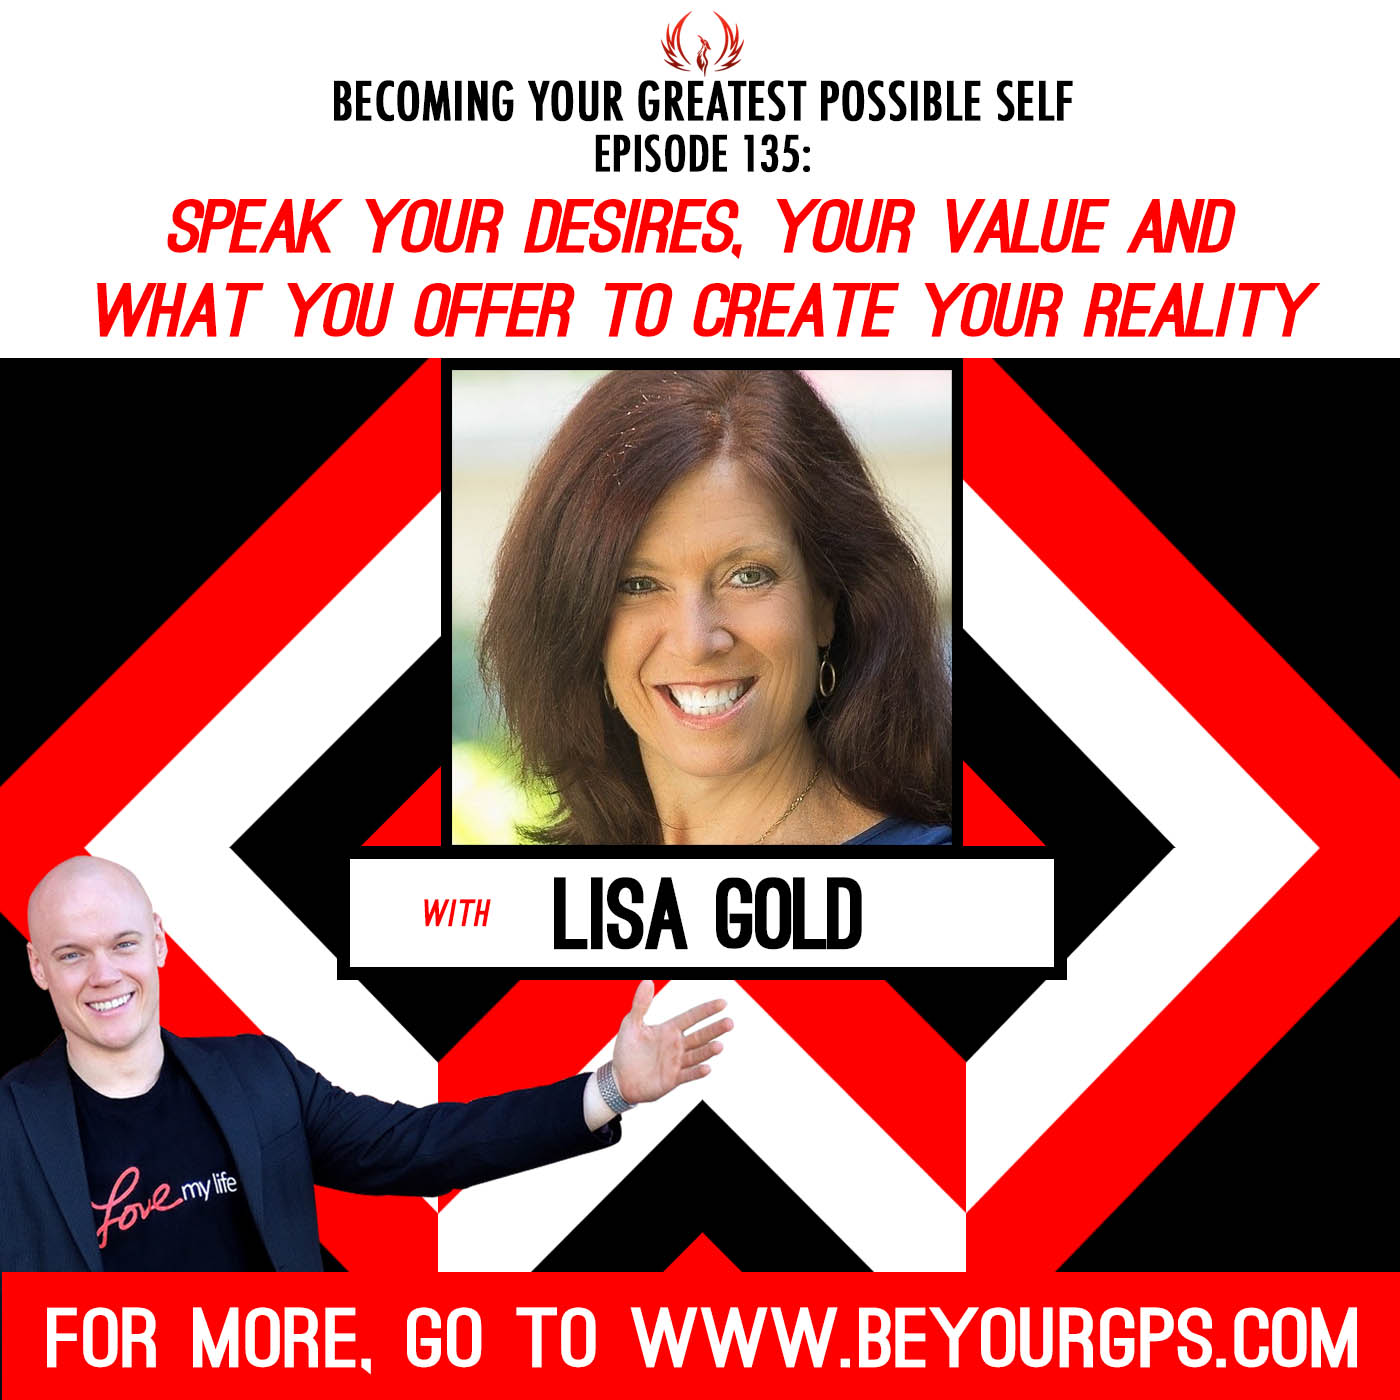 Speak Your Desires, Your Value and What You Offer to Create Your Reality with Lisa Gold